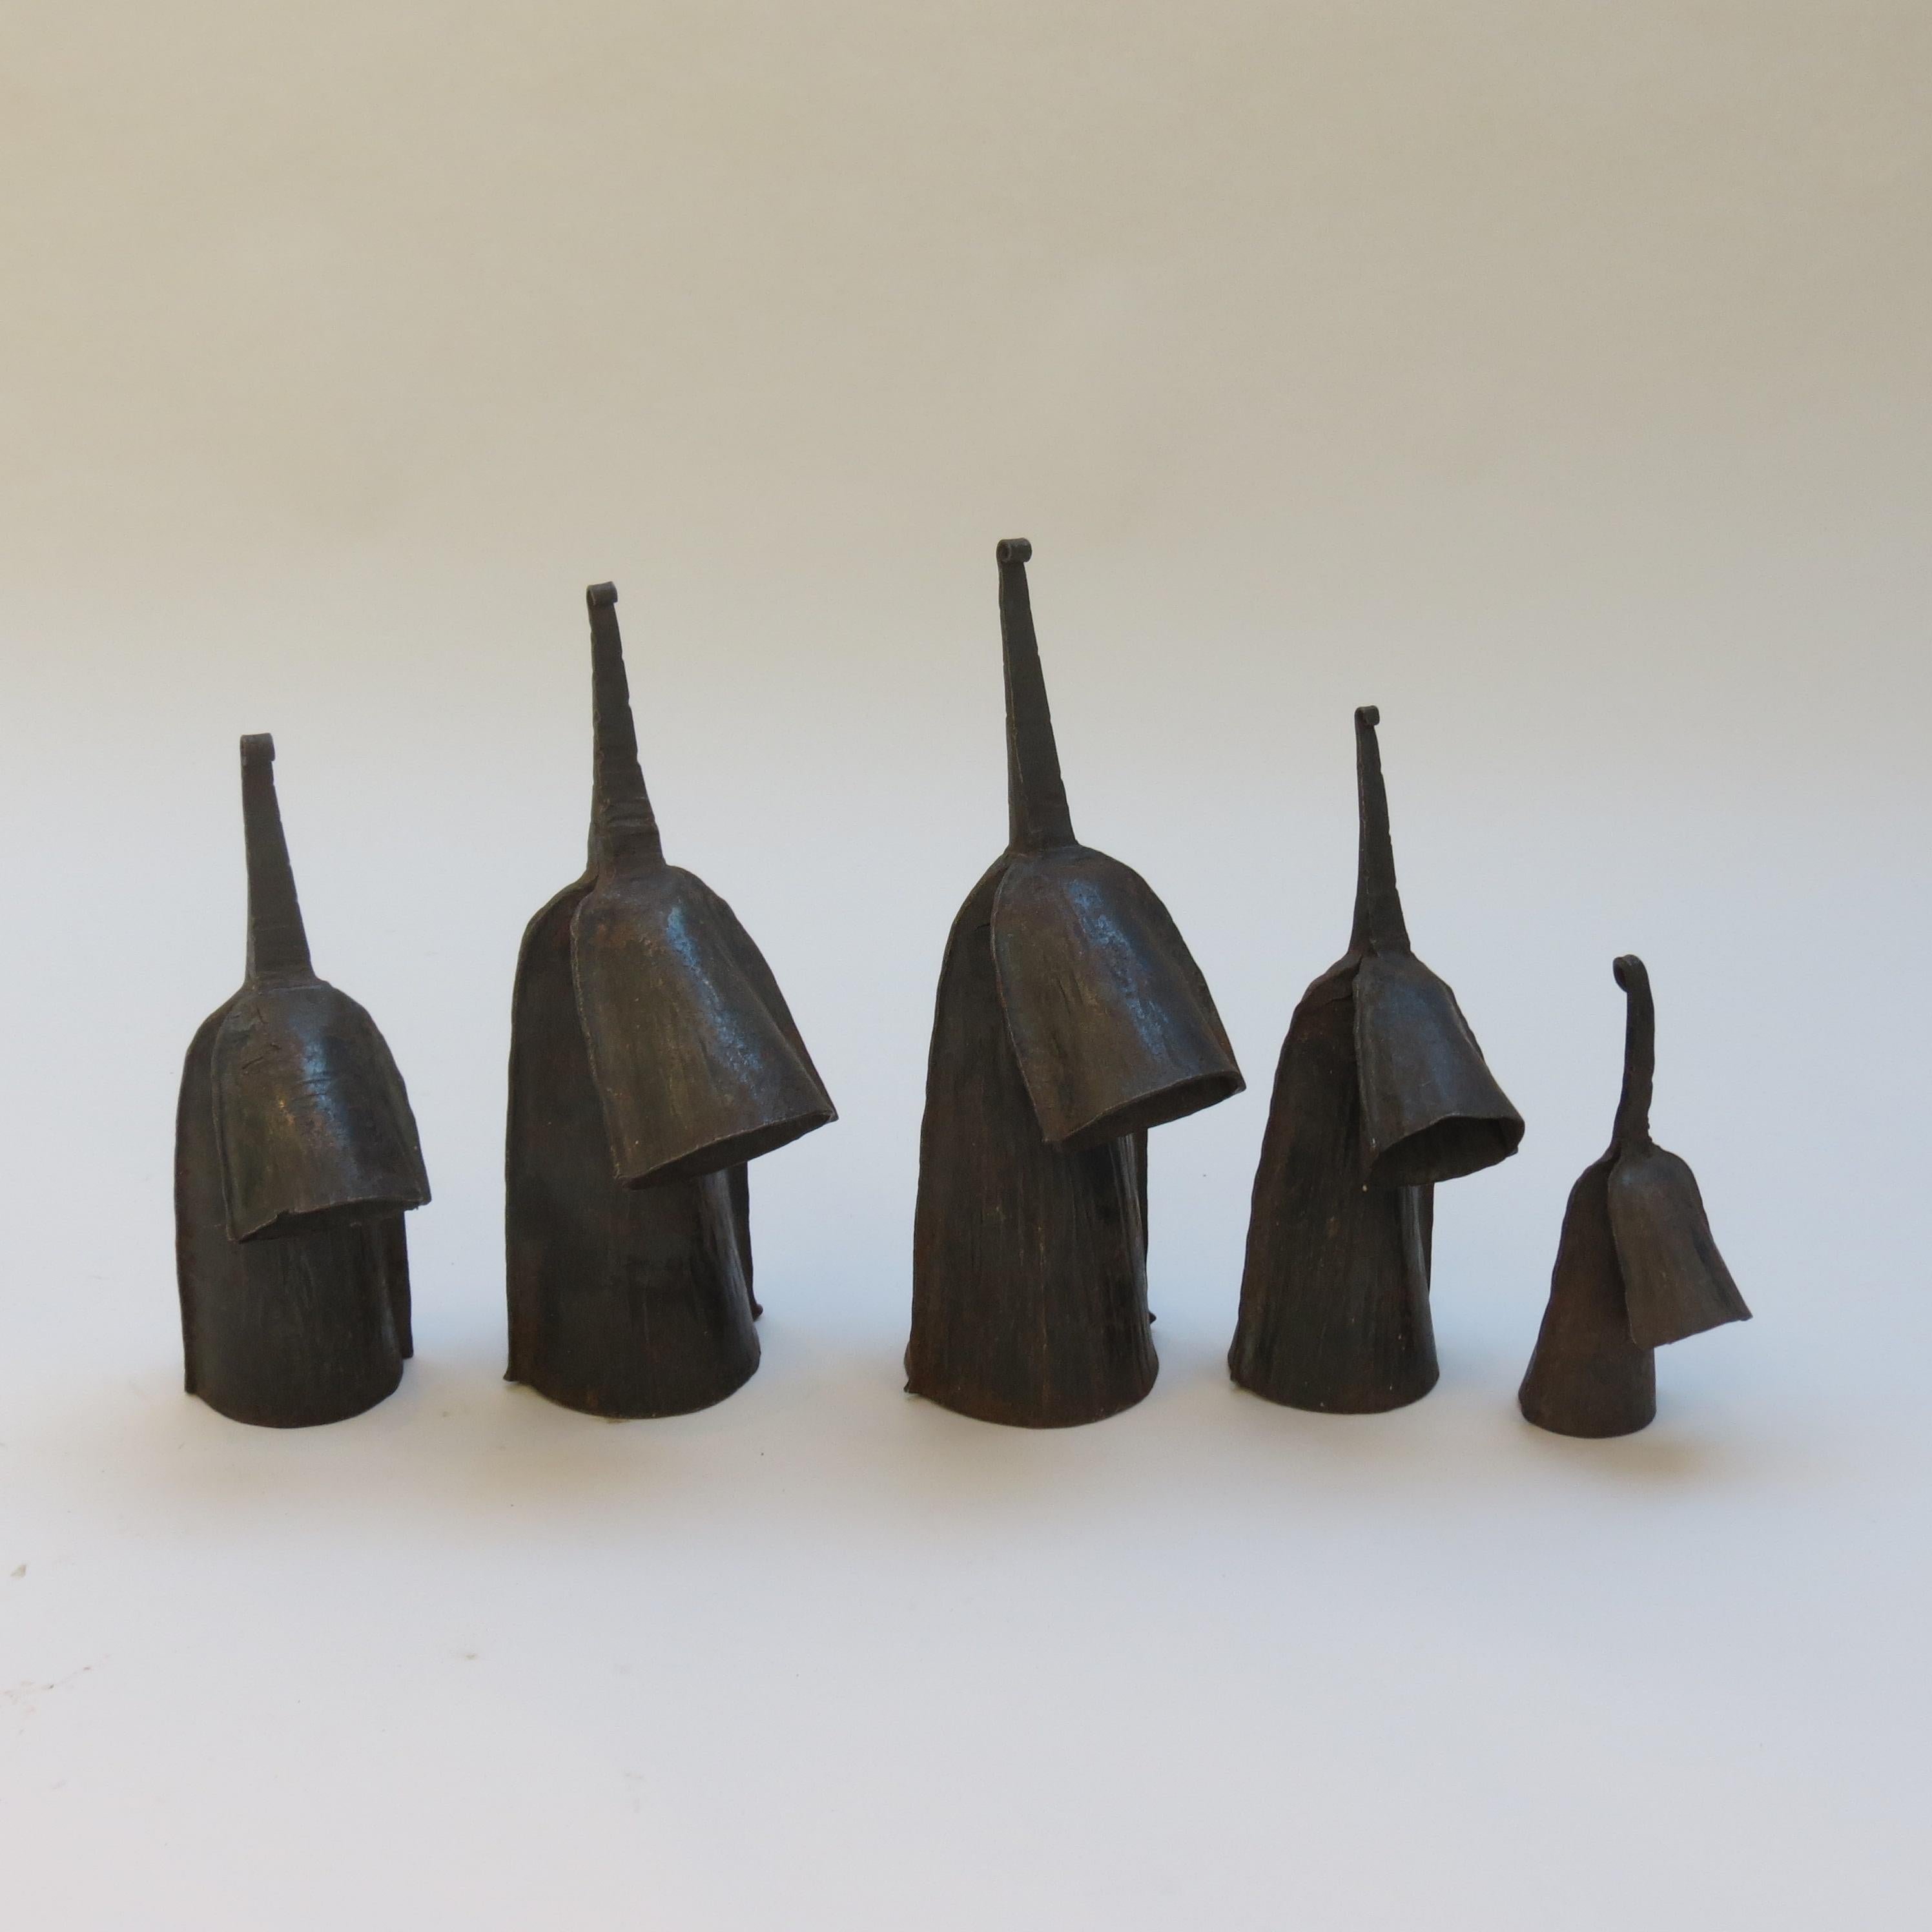 Set of 5 vintage Agogo bells in graduating size. They are made from steel and have been hand produced in Ghana. The are originally used as a percussion instrument and as a group are extremely decorative.

A nice vintage hand produced set with good